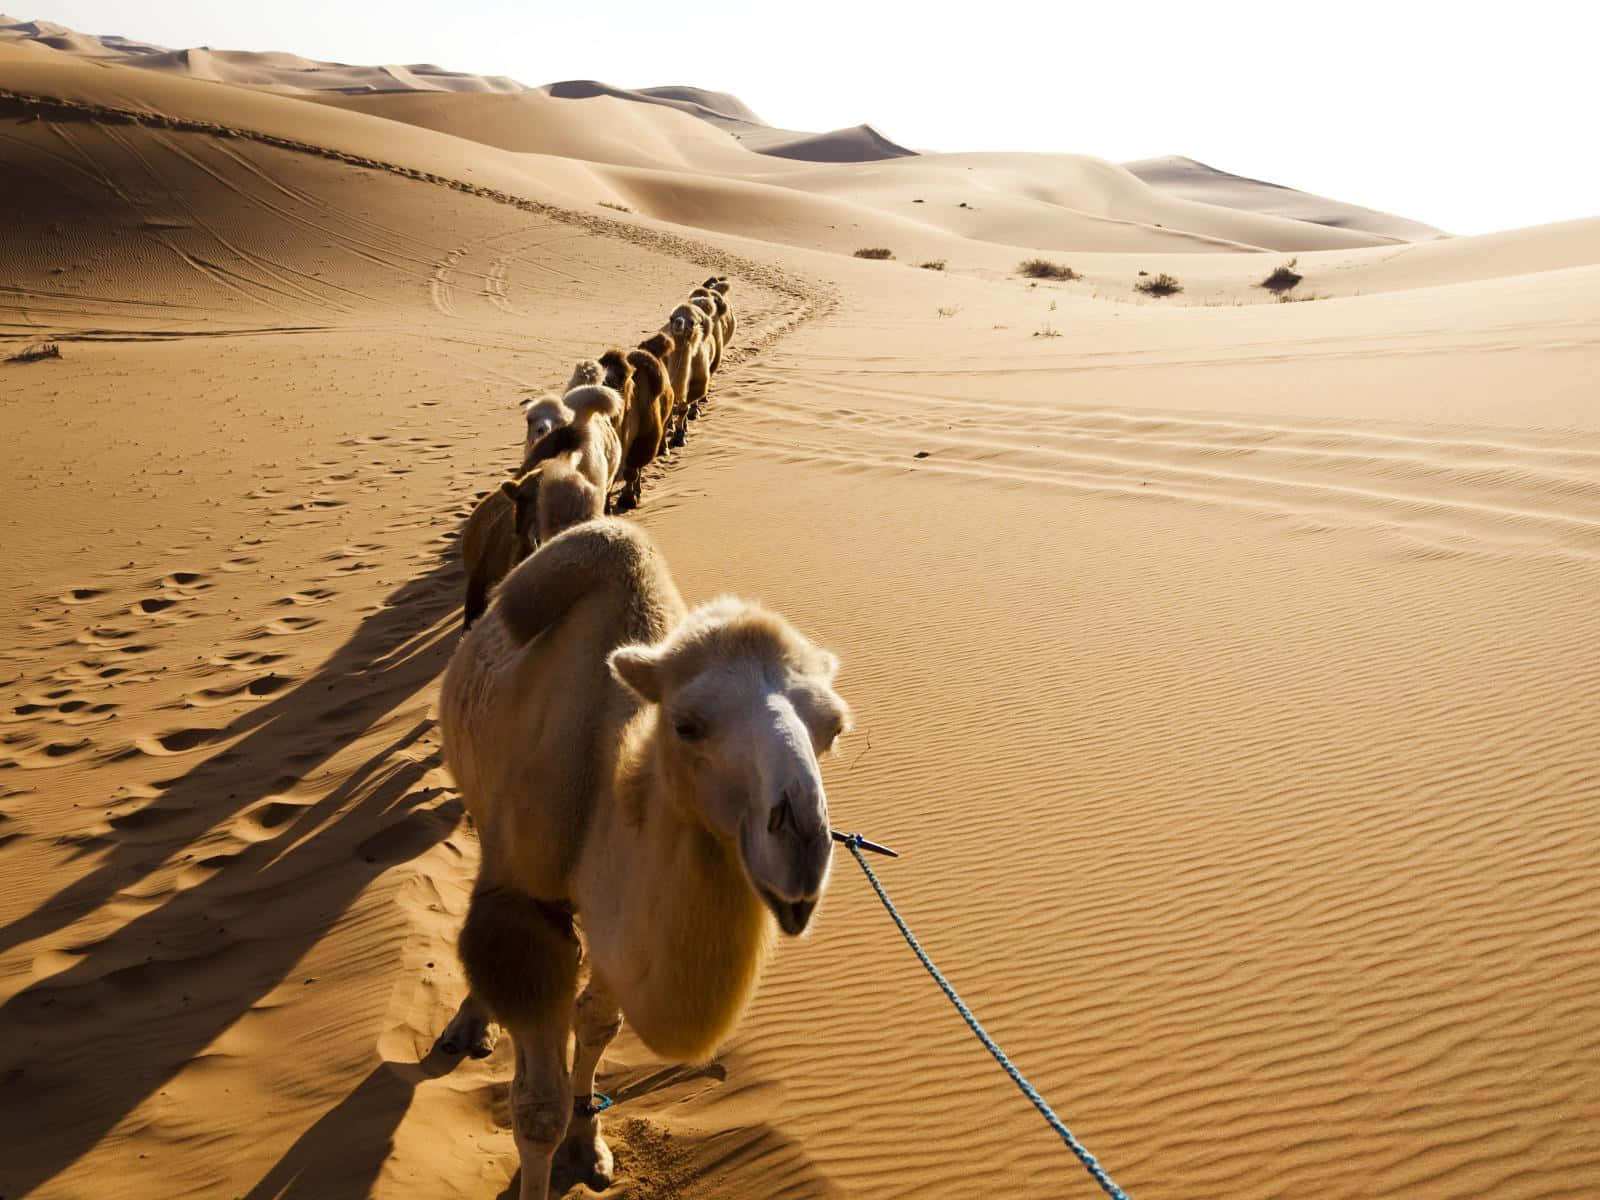 "A camel grazing on a vast expanse of sand and sun"